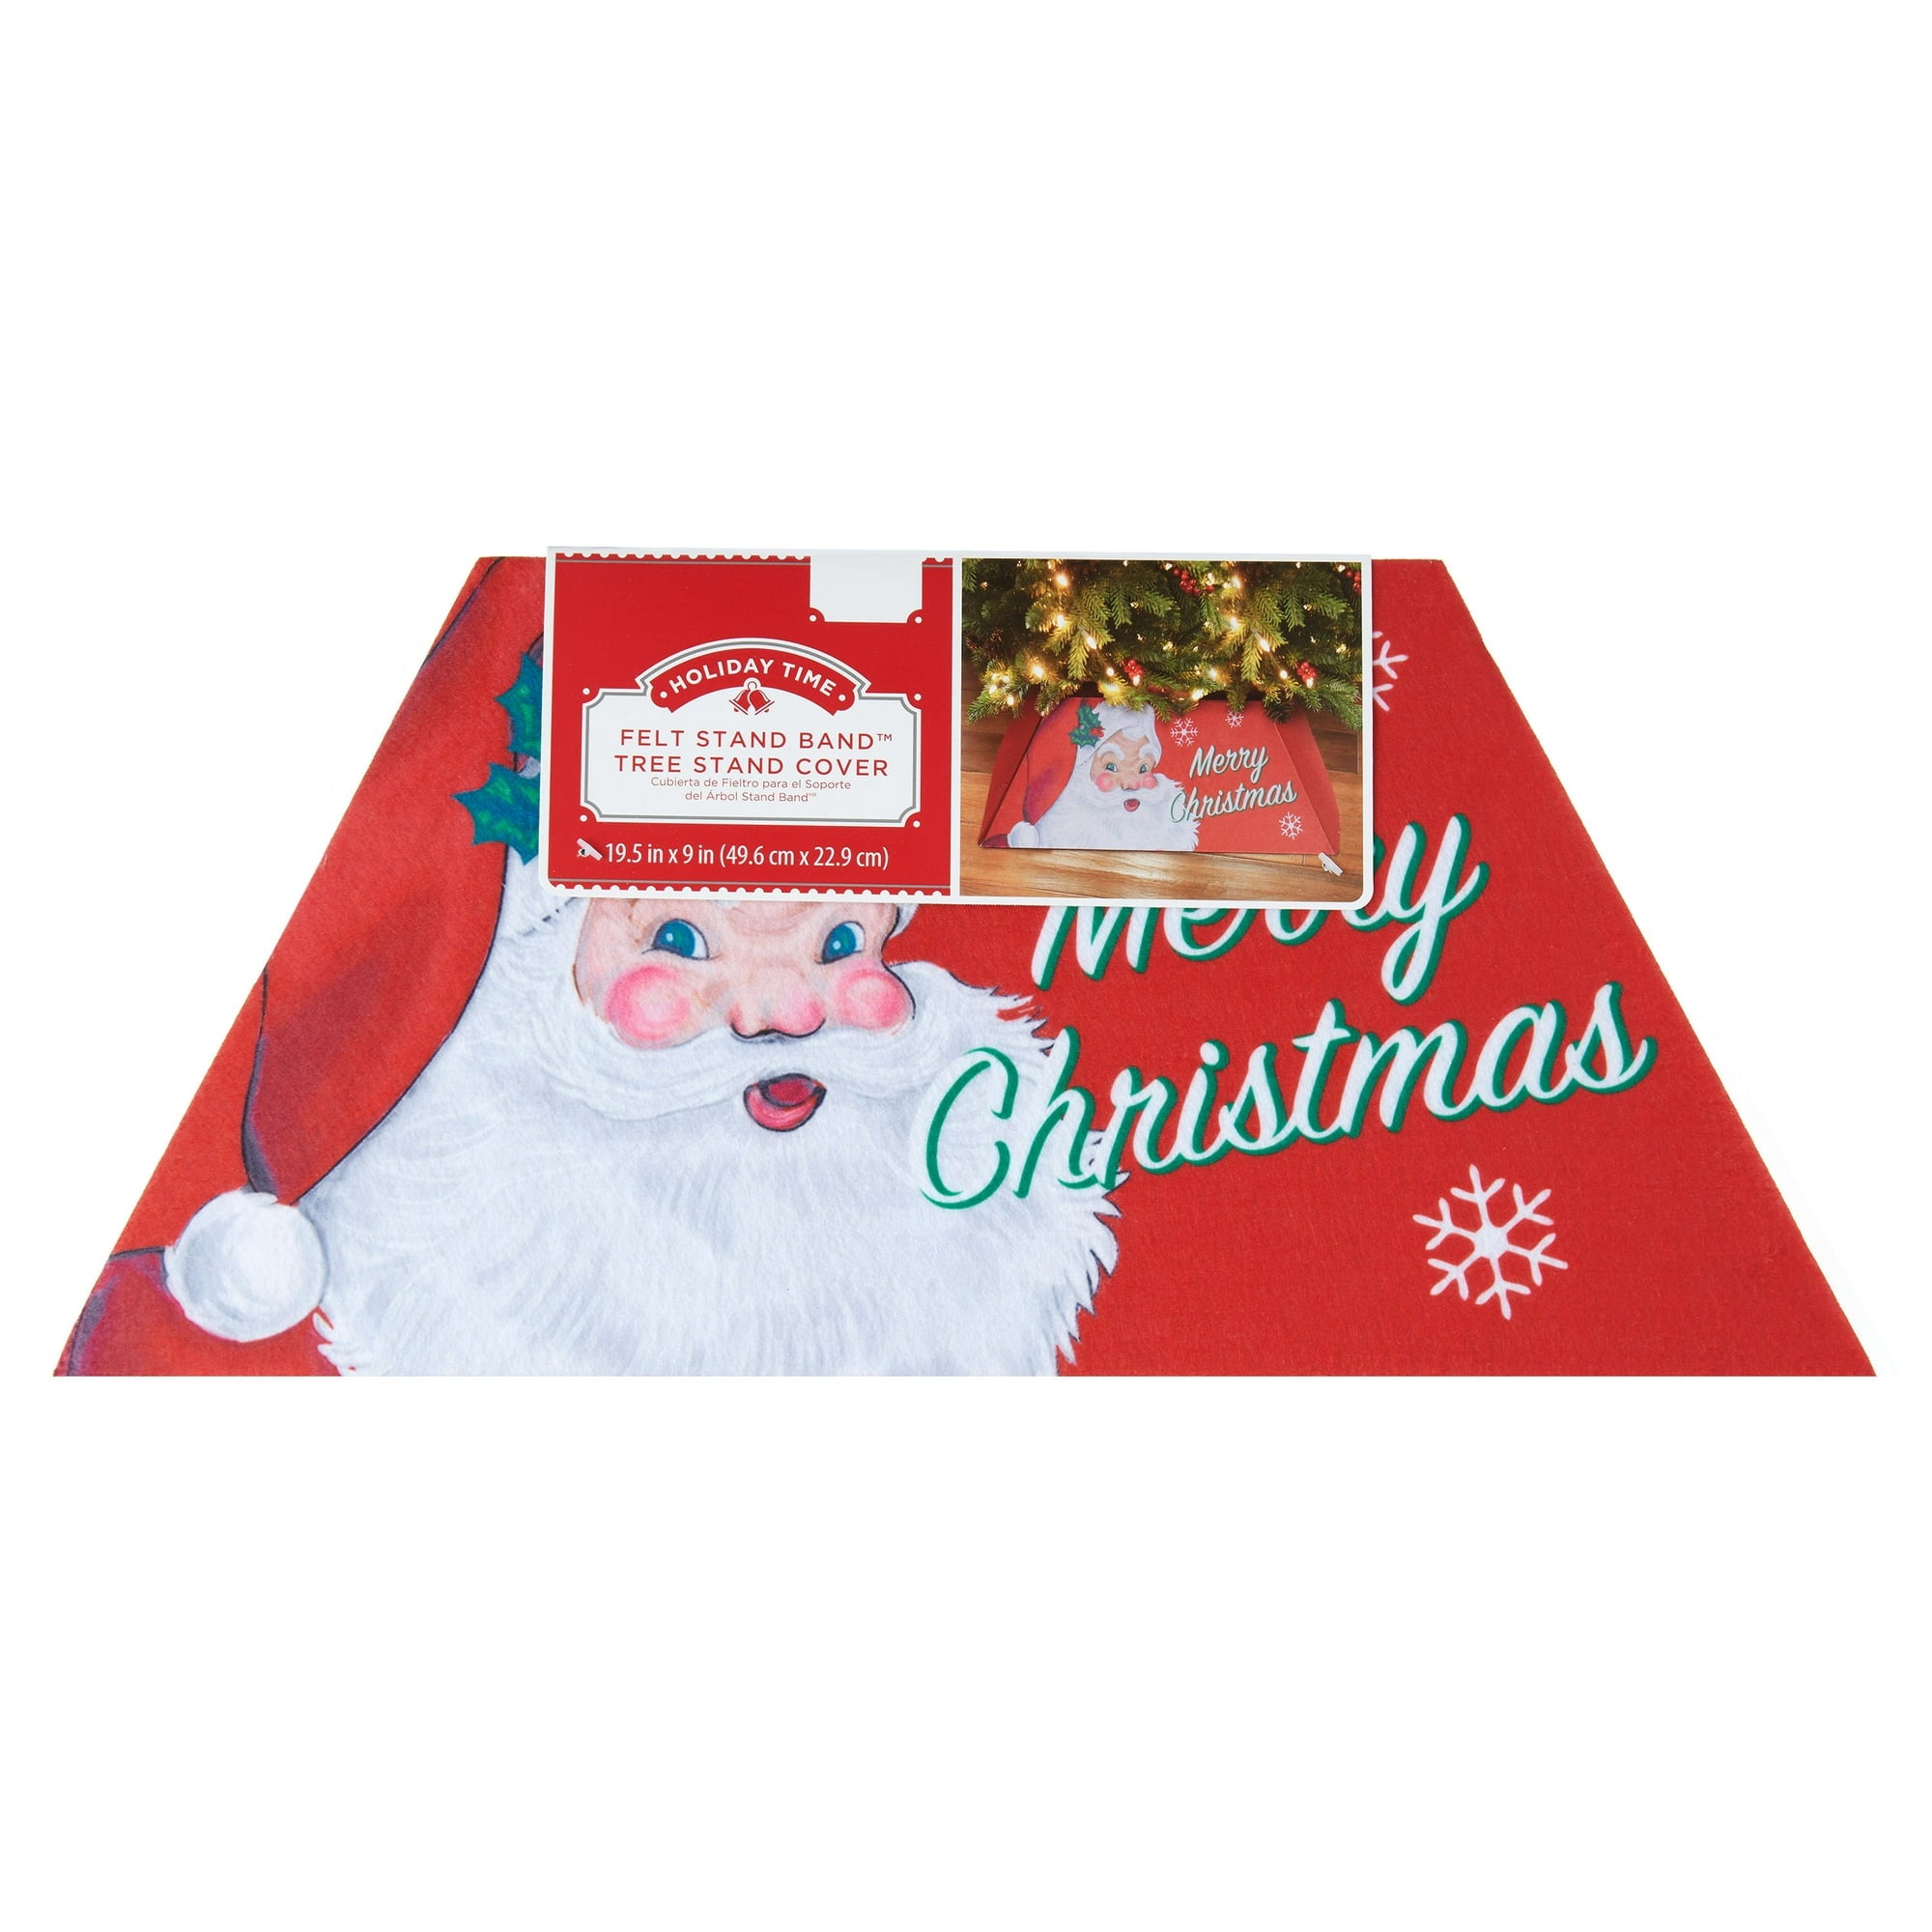 Holiday Time Merry Christmas Felt Stand Band Tree Stand Cover, 19.5 x 9